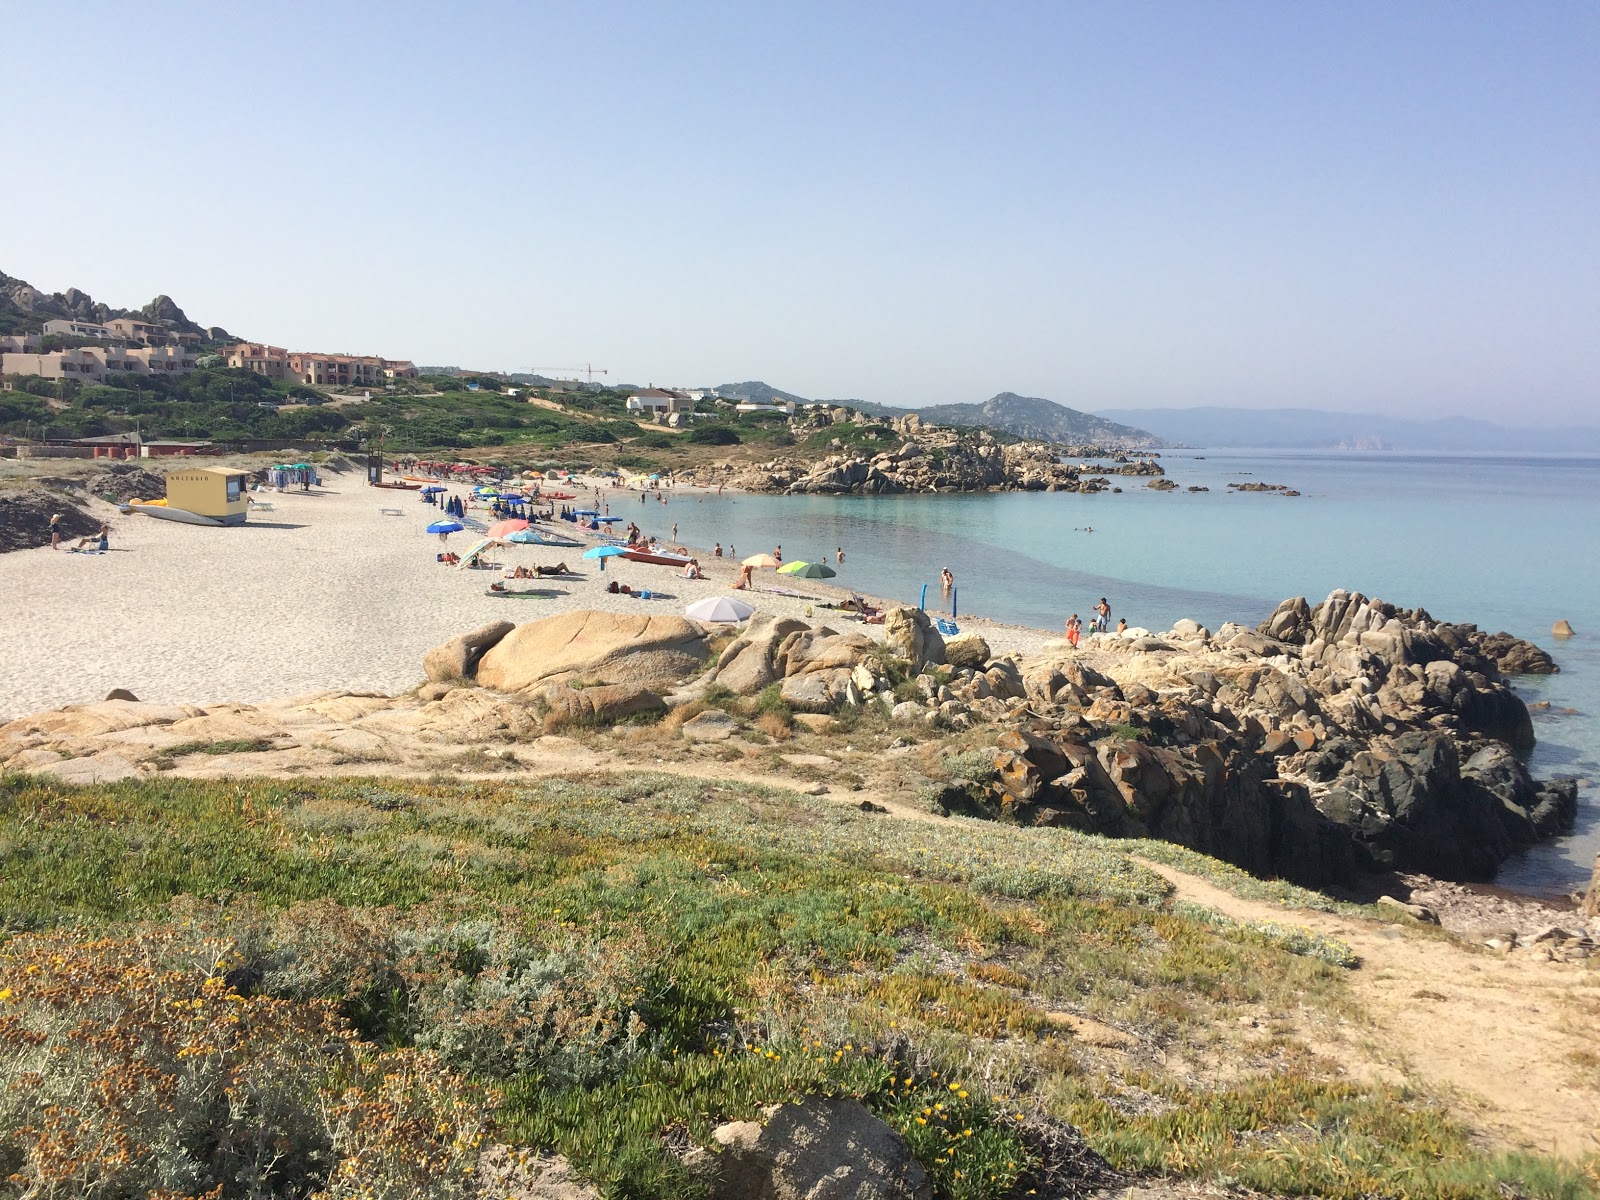 Photo of Spiaggia Santa Reparata - recommended for family travellers with kids